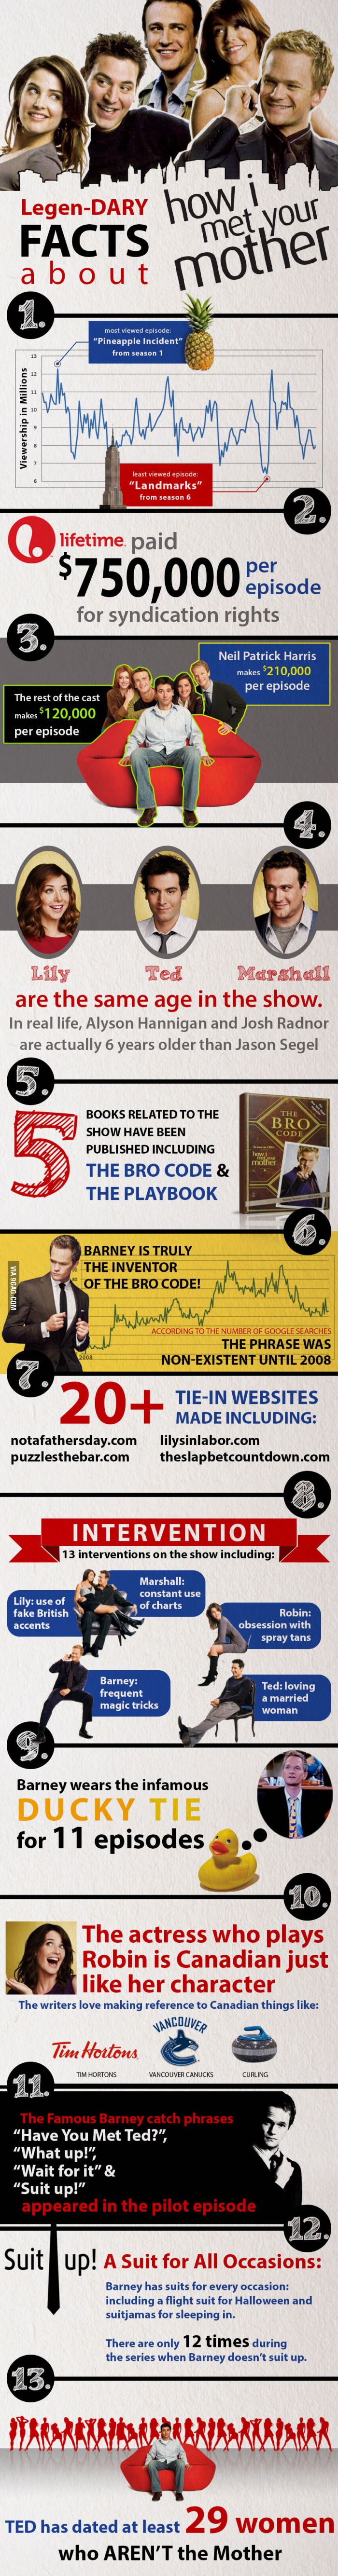 legendary facts about how i met your mother, tv show, himym